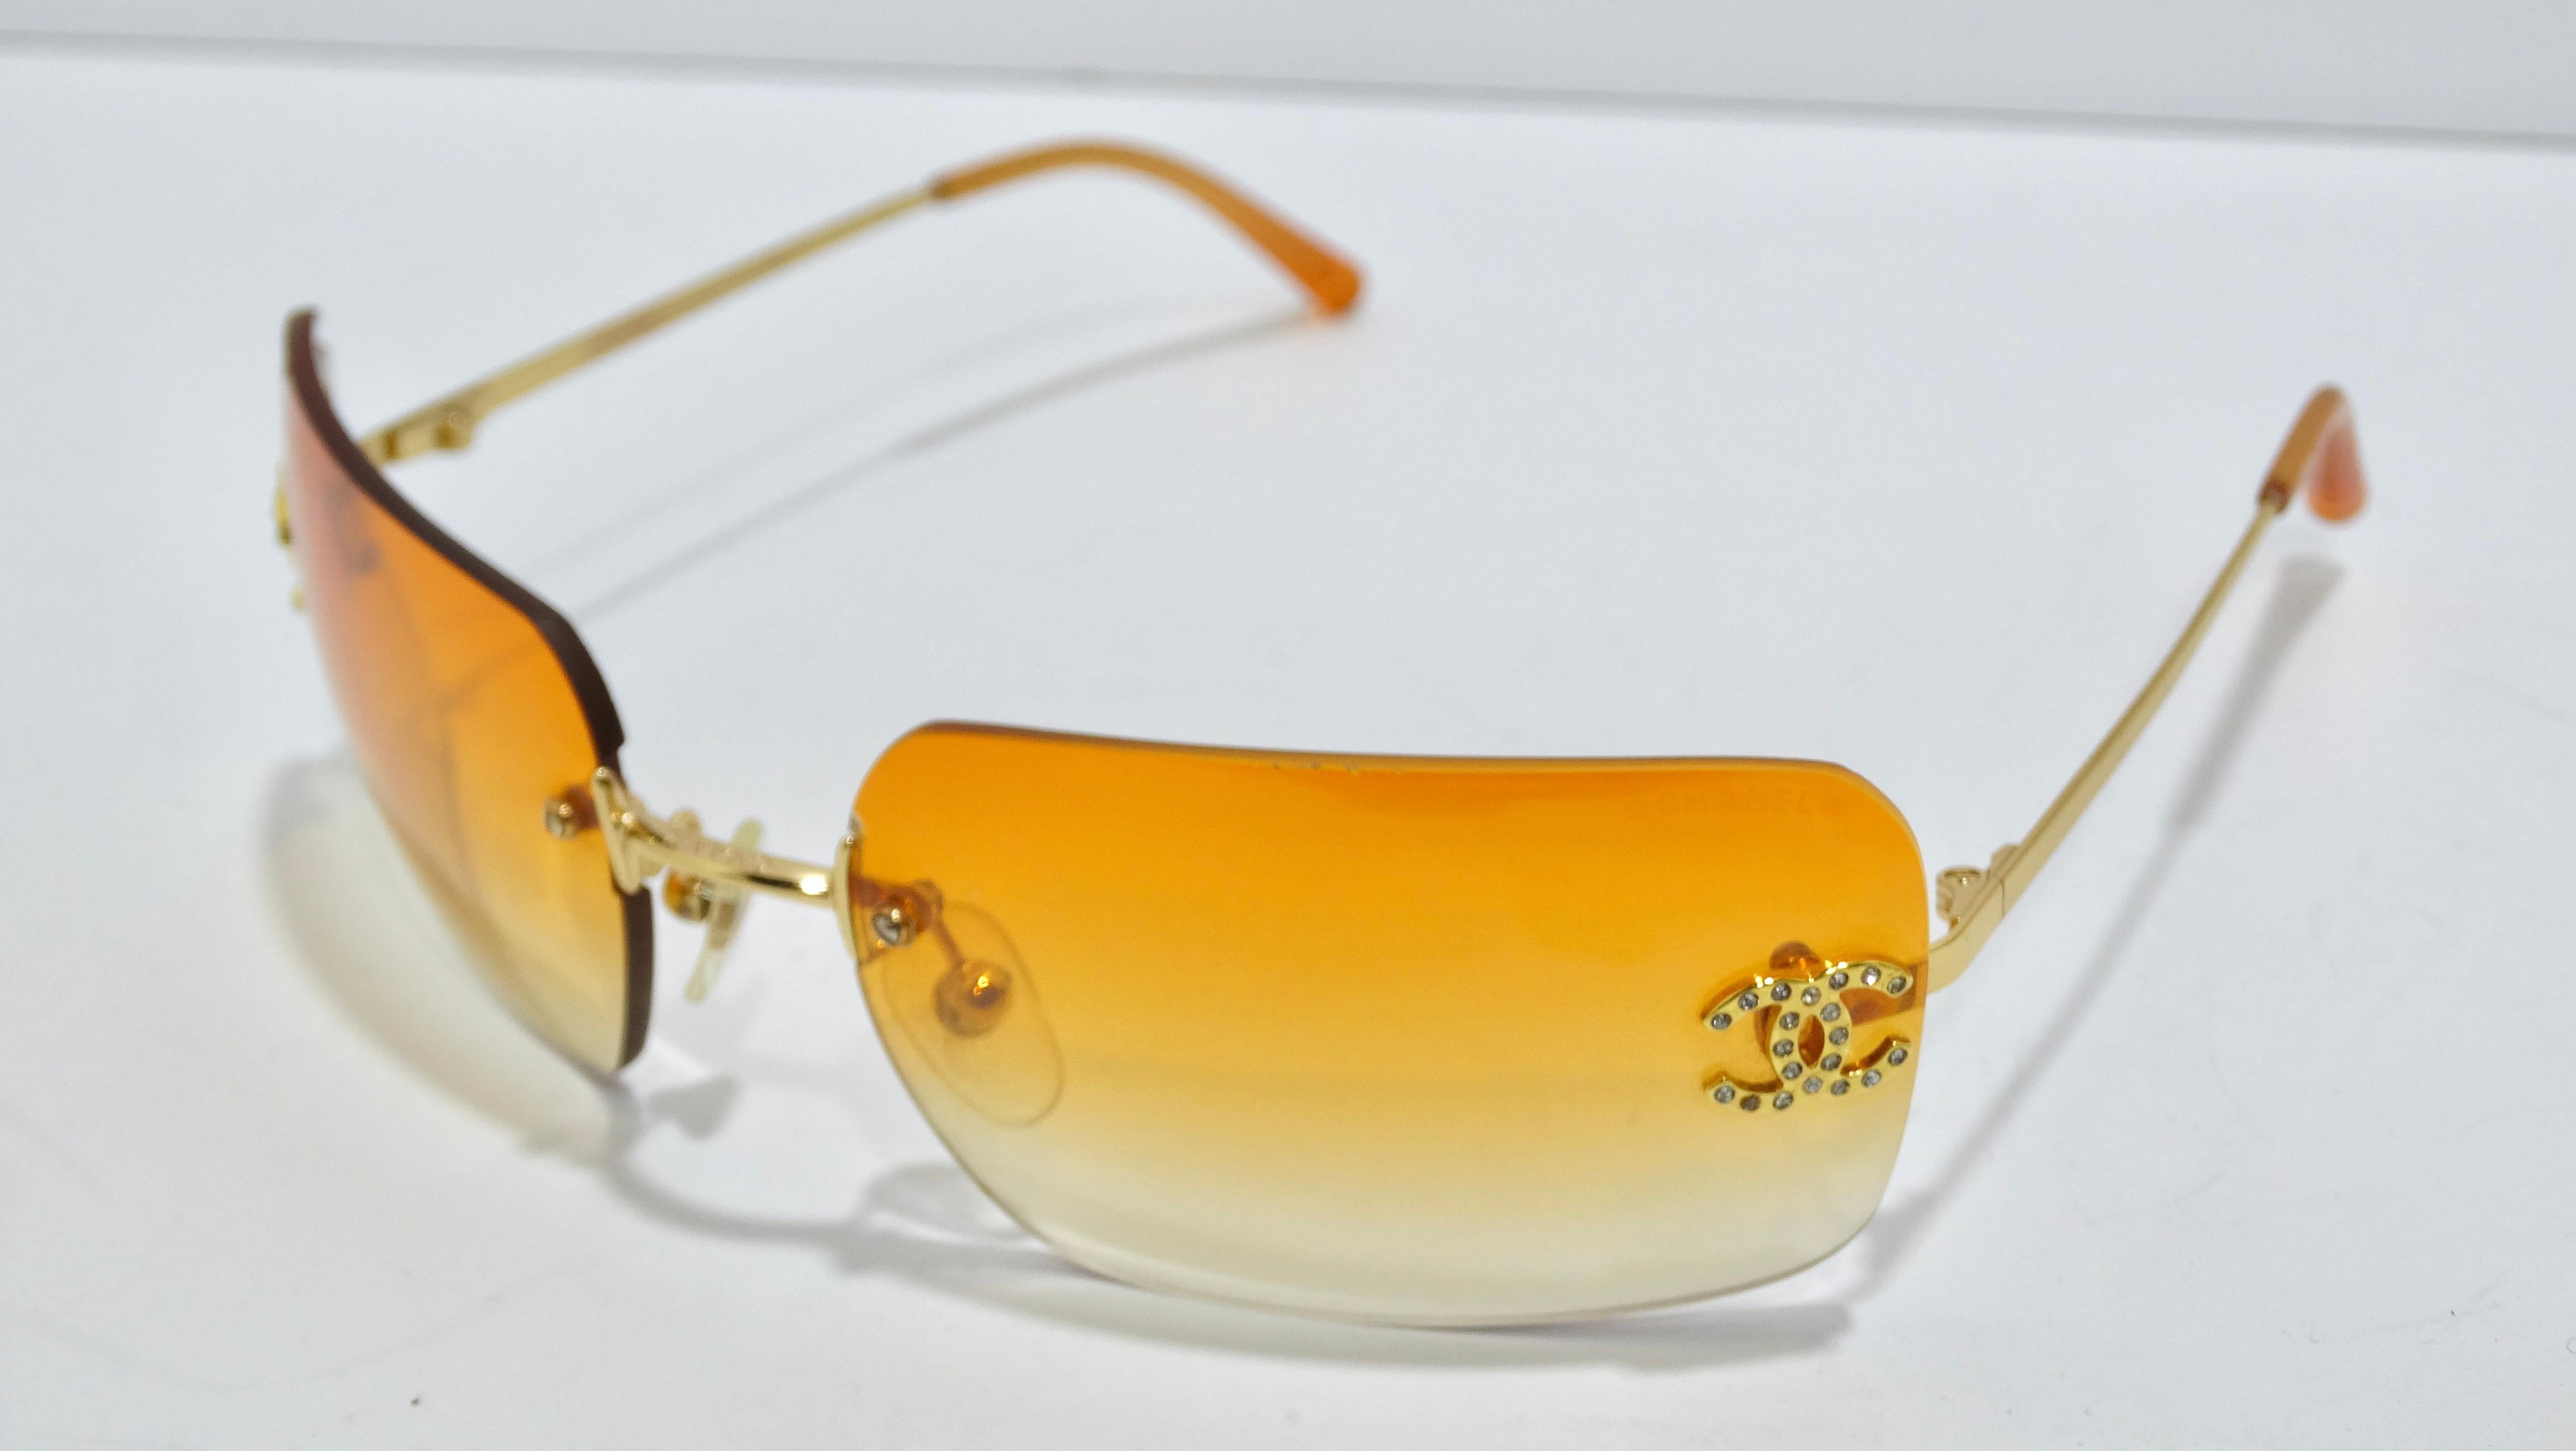 These are a 2000s Chanel gem! It doesn't get much better than this. The adorable details of these glasses can't go overlooked as they feature an orange to clear gradient lenses and the classic CC branding in rhinestones. A petite frame gives you a